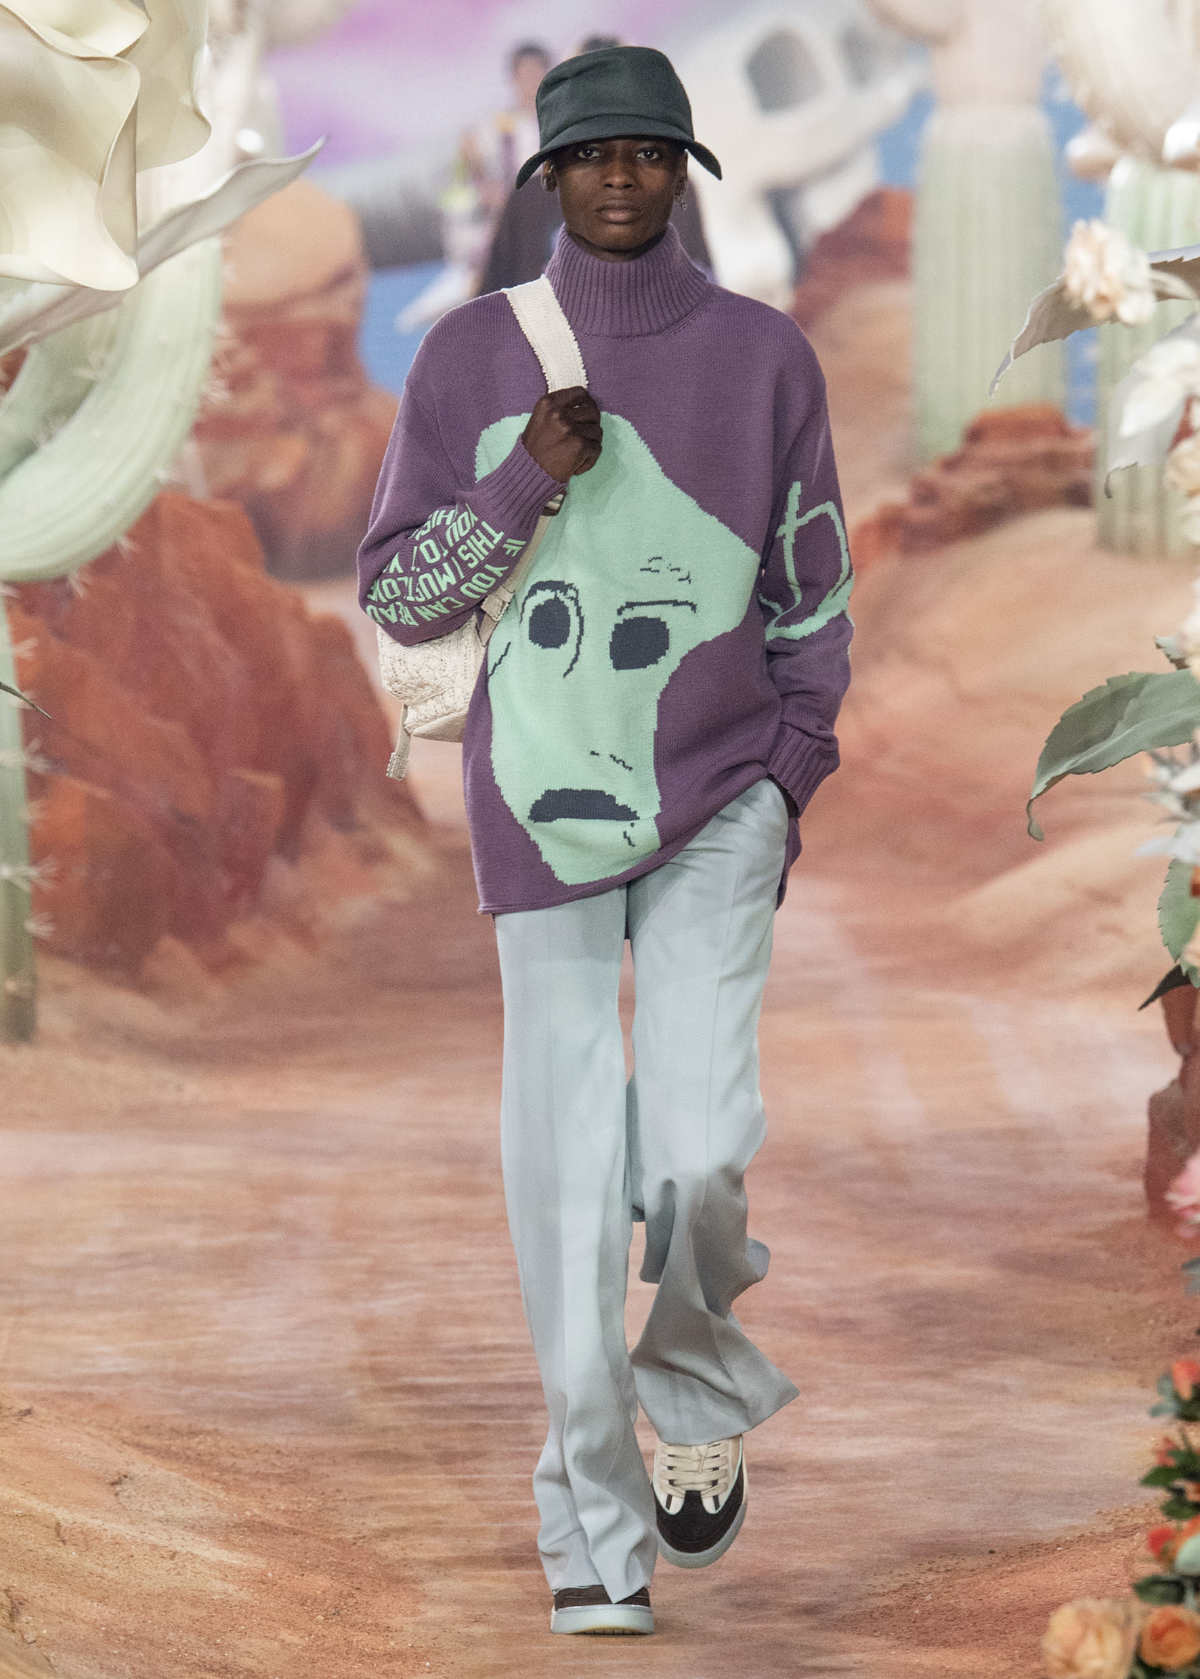 Dior Presents Its New Men's Summer 2022 Collection